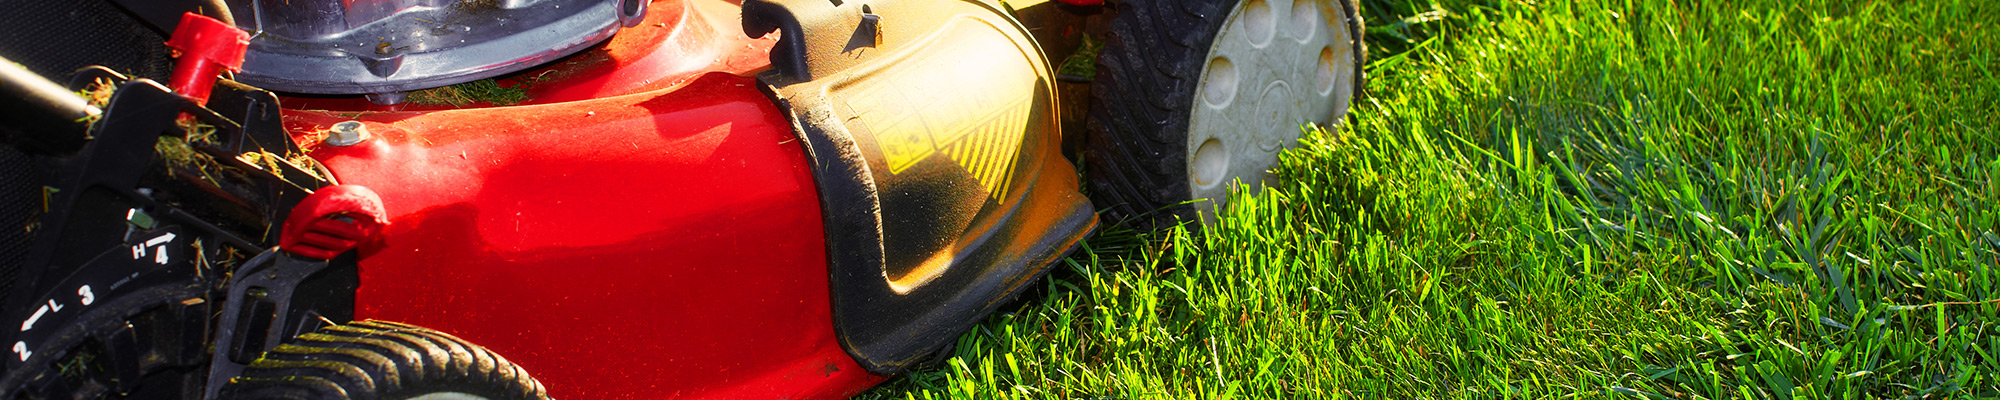 Red push lawn mower on green grass with the sun shining on it